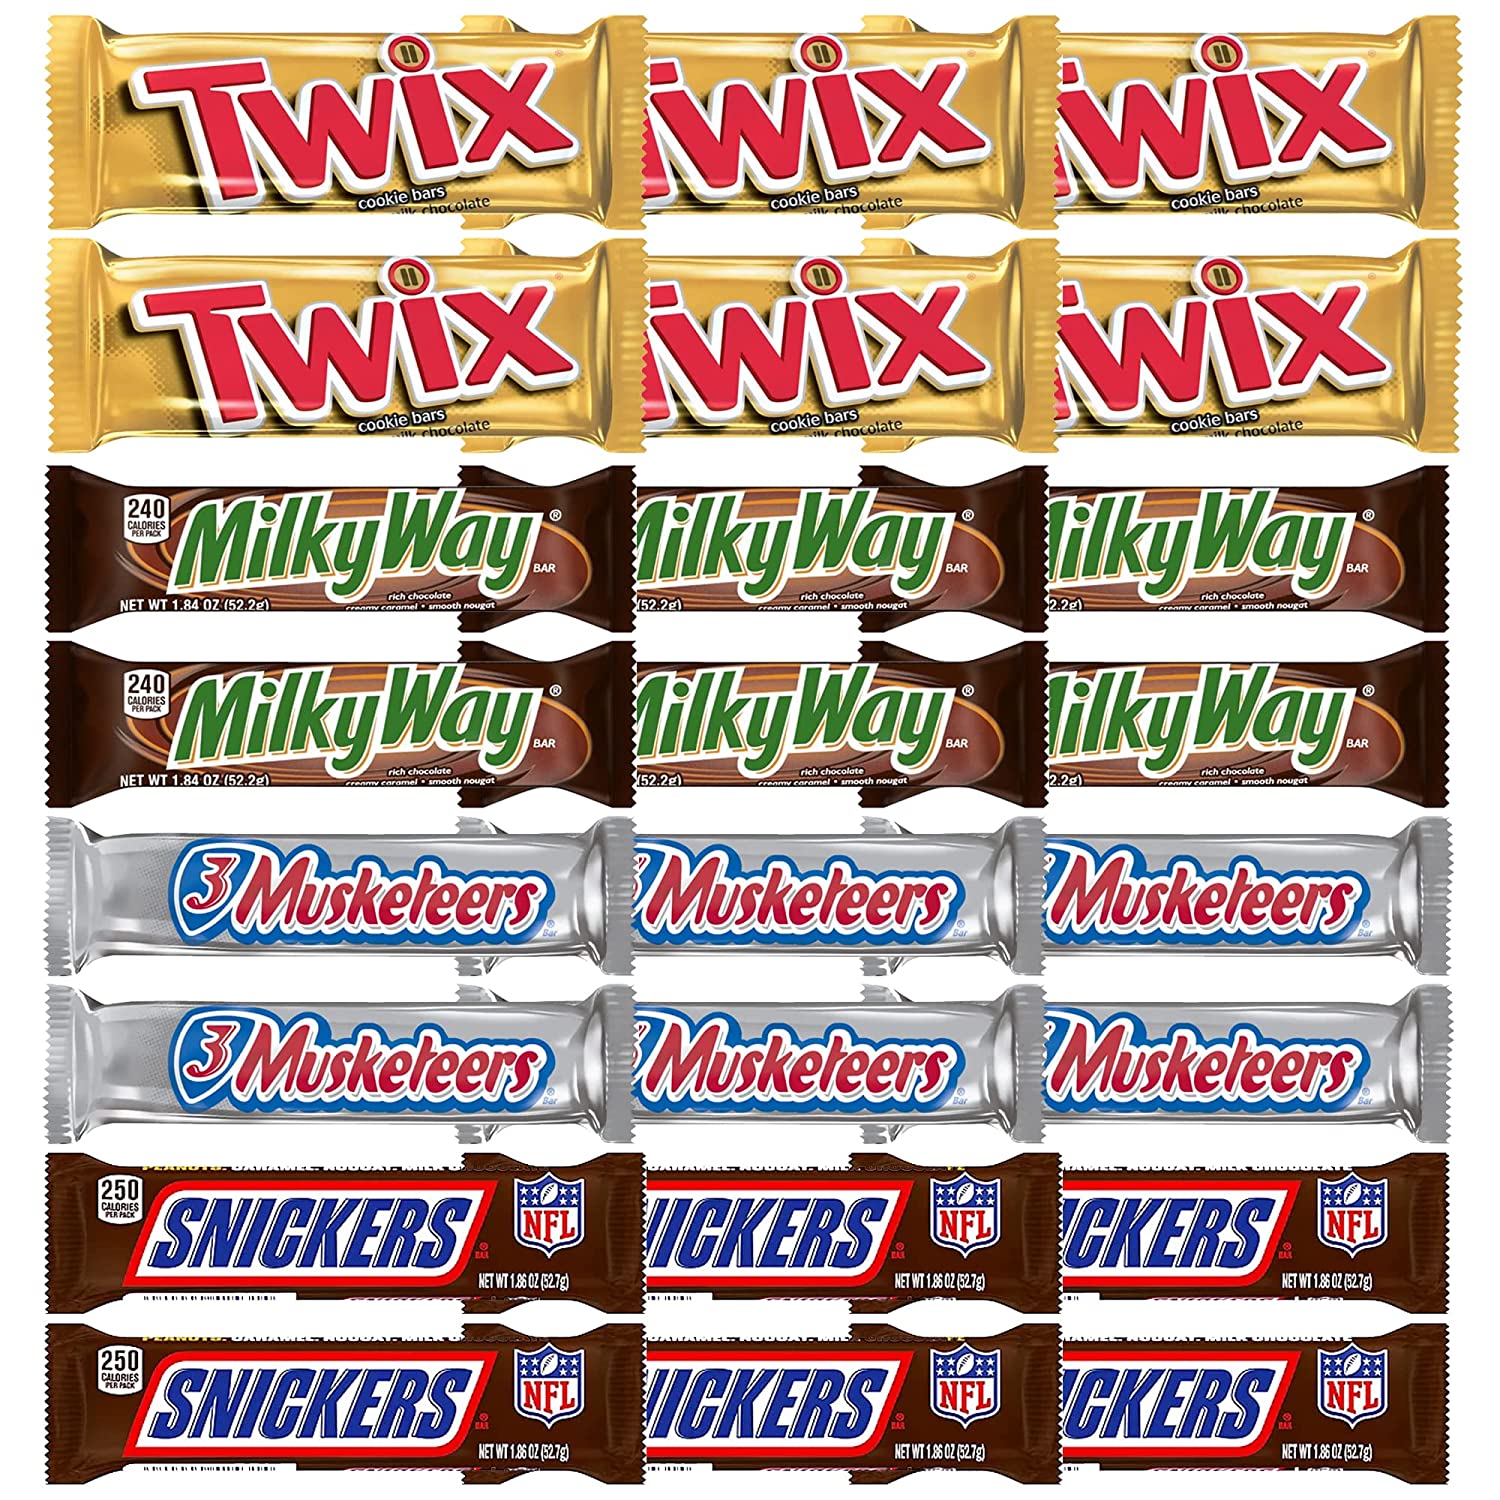 SNICKERS, TWIX, MILKY WAY & 3 MUSKETEERS Individually Wrapped Variety ...